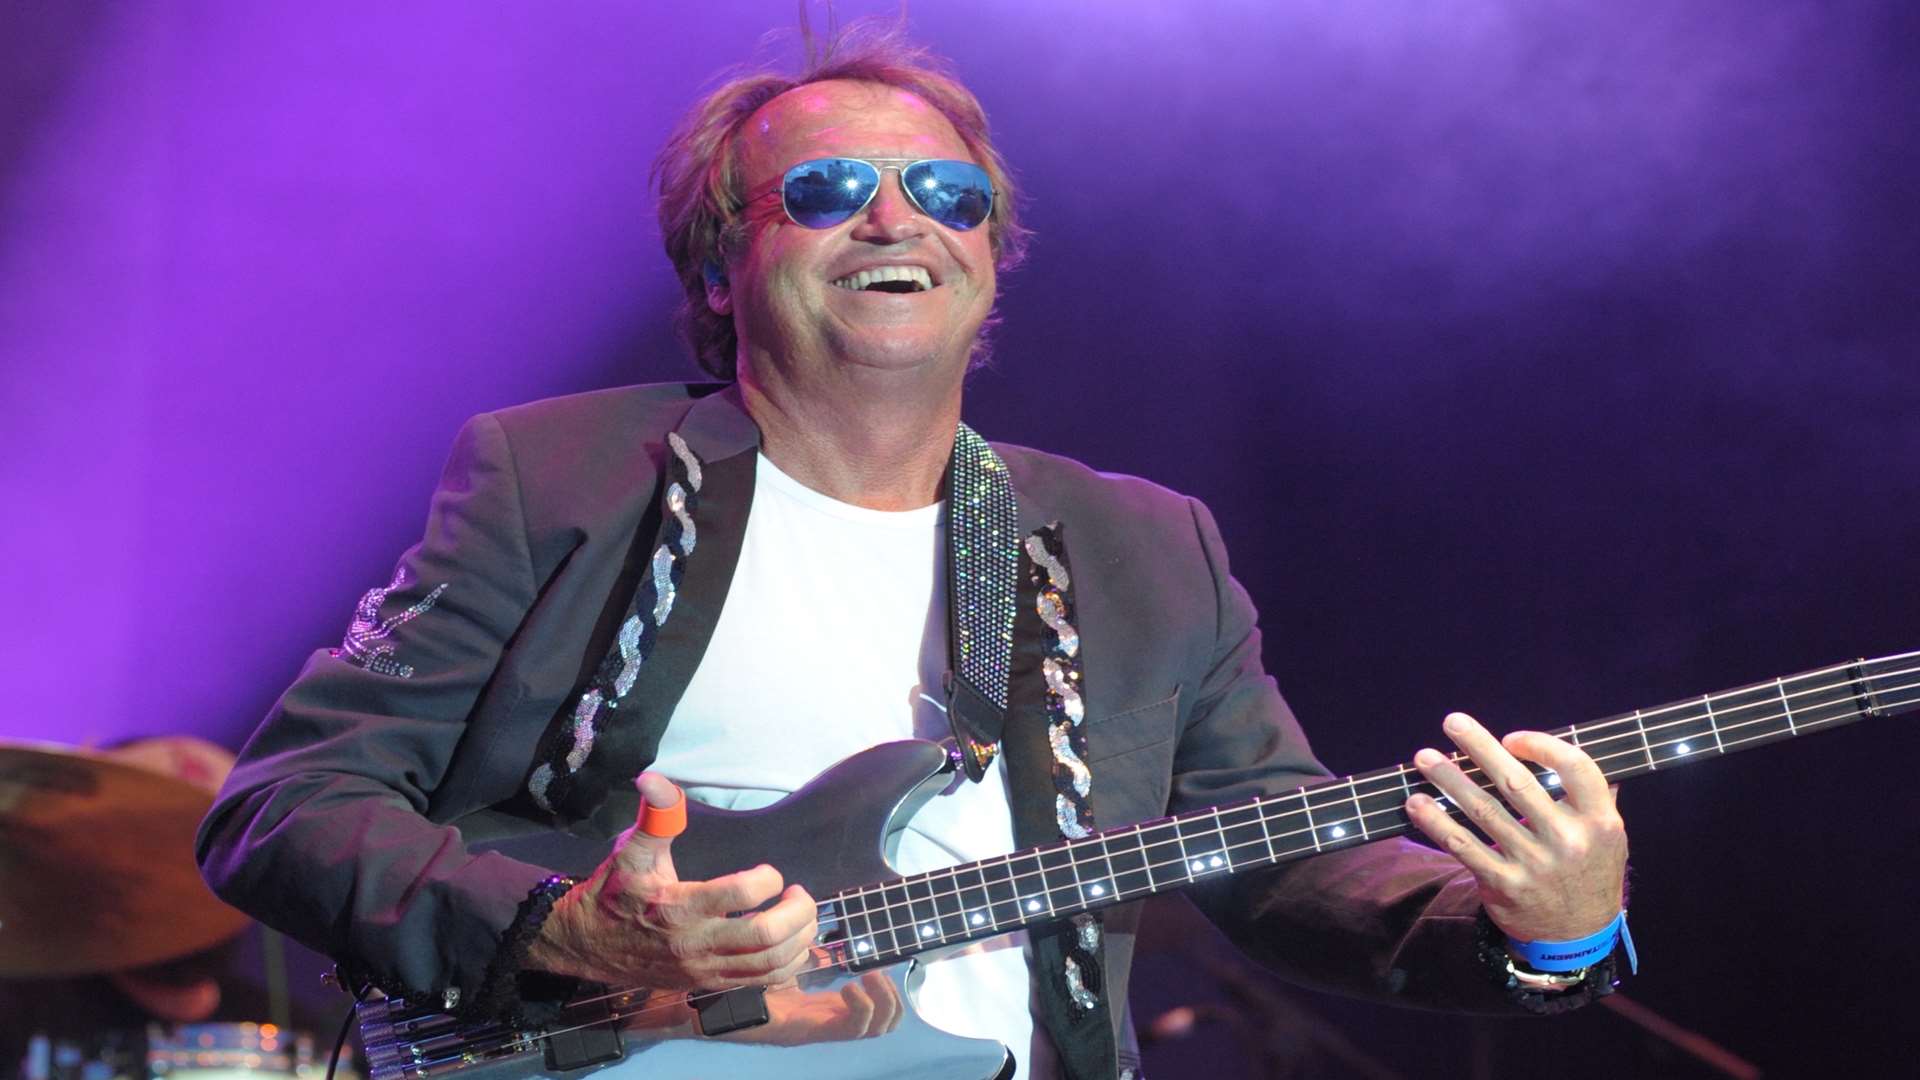 Mark King from Level 42